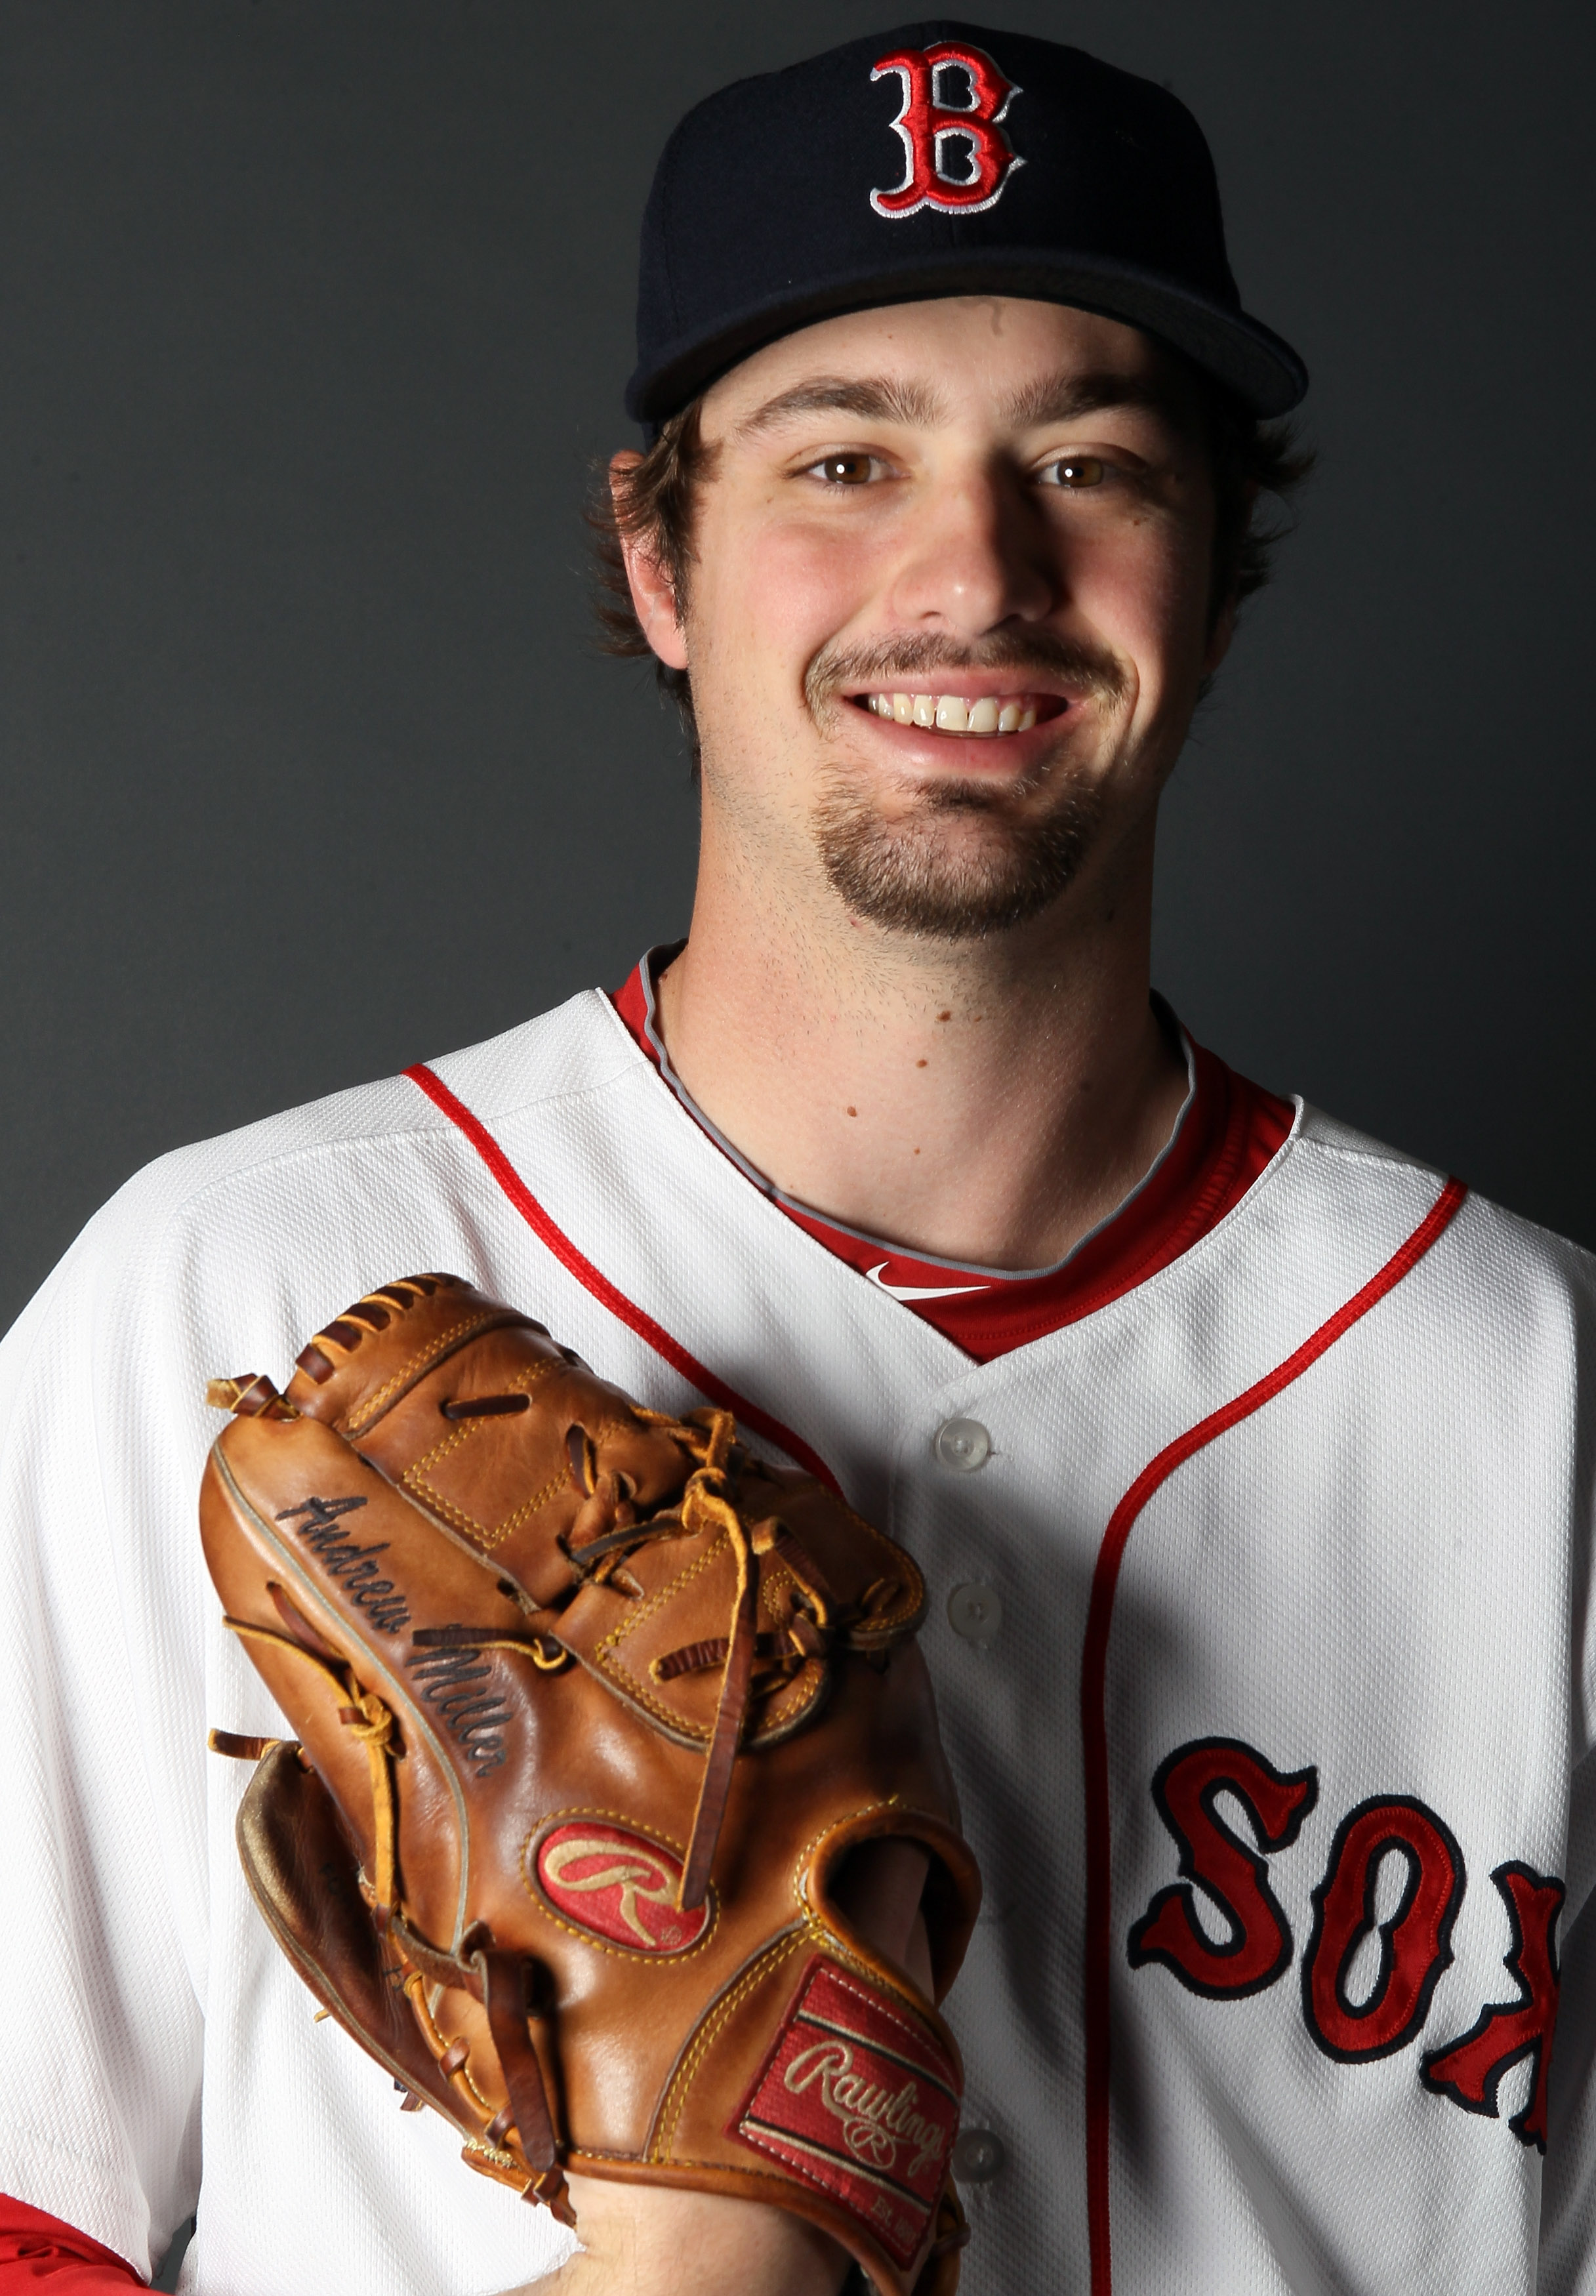 FT. MYERS, FL - FEBRUARY 20:  :  Andrew Miller #30 of the Boston Red Sox poses for a portrait during the Boston Red Sox Photo Day on February 20, 2011 at the Boston Red Sox Player Development Complex in Ft. Myers, Florida  (Photo by Elsa/Getty Images)